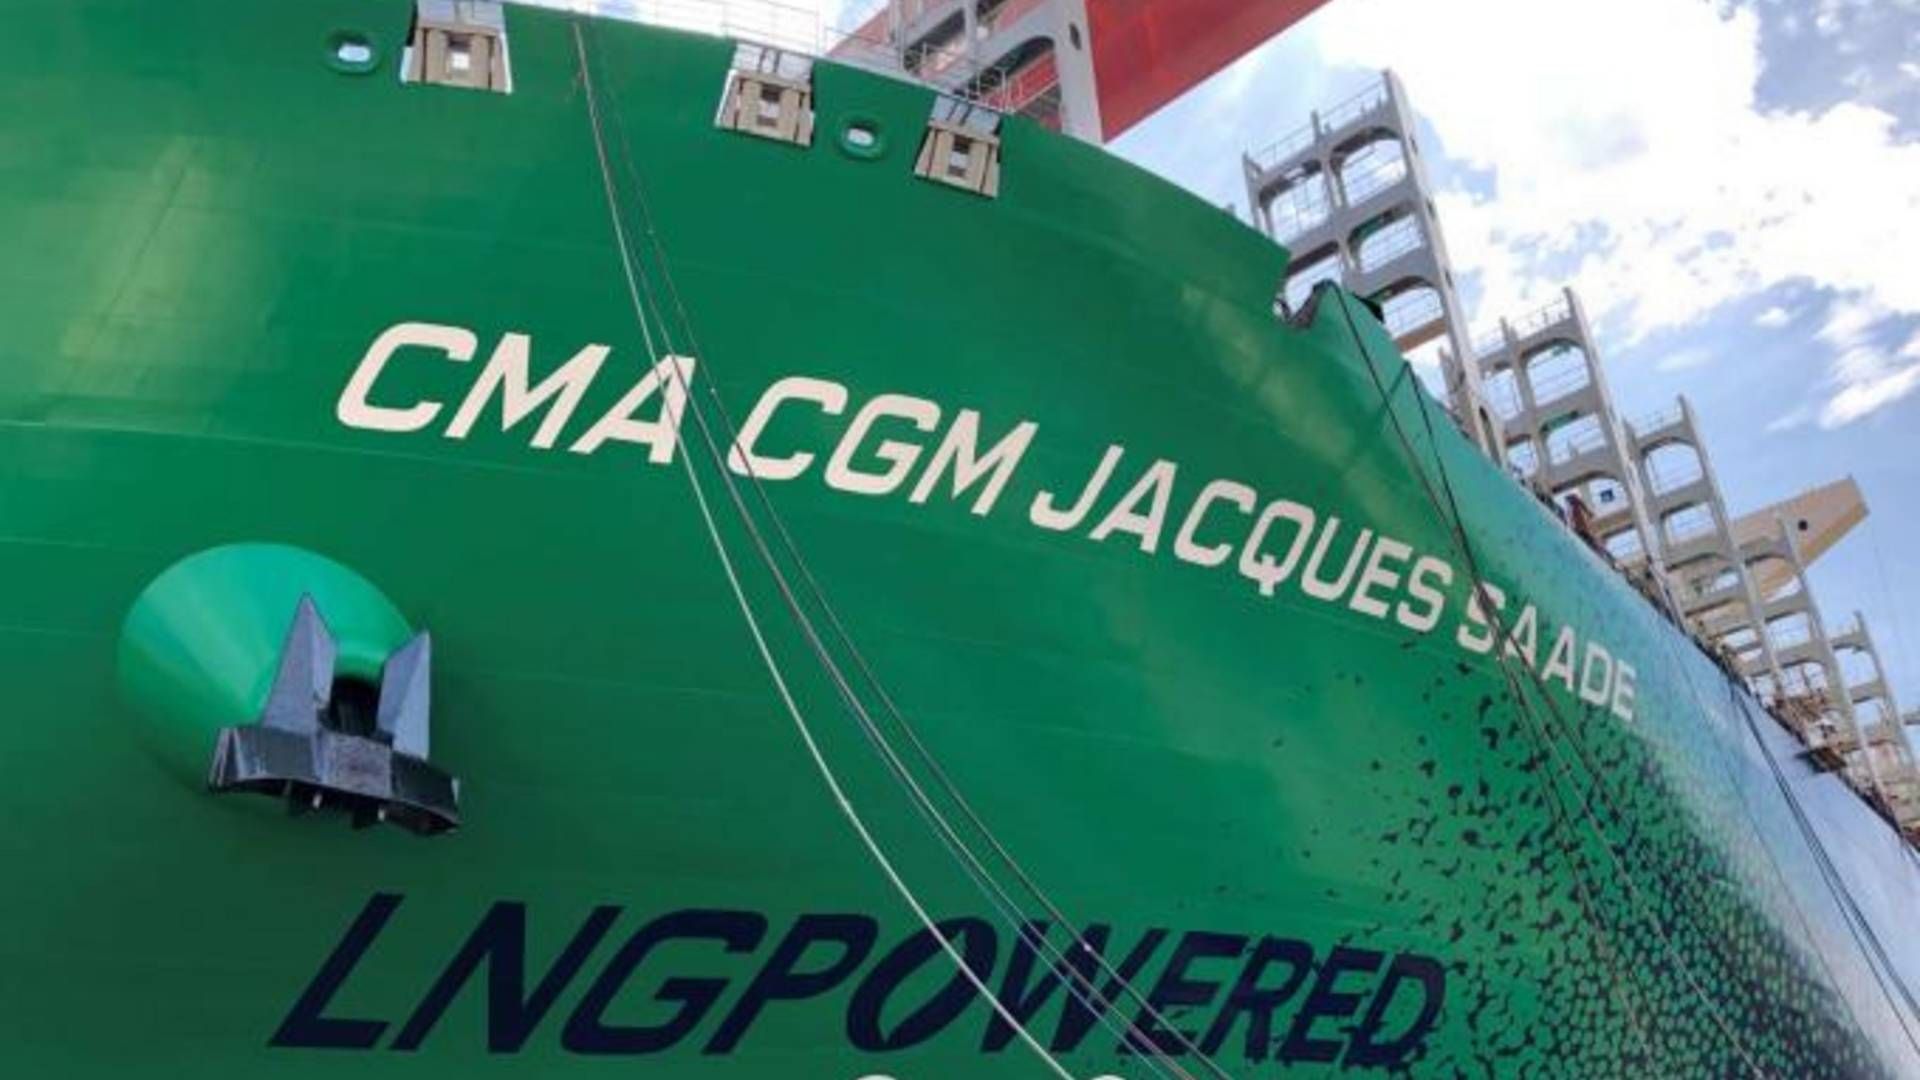 According to the EU's environment committee, ENVI, carbon emissions ought to reduced by 100 percent in 2050 instead of the proposed 75 percent. According to NGO network GSCC, this means that no more ships will sail on LNG in the EU as of 2035. | Photo: PR/CMA CGM